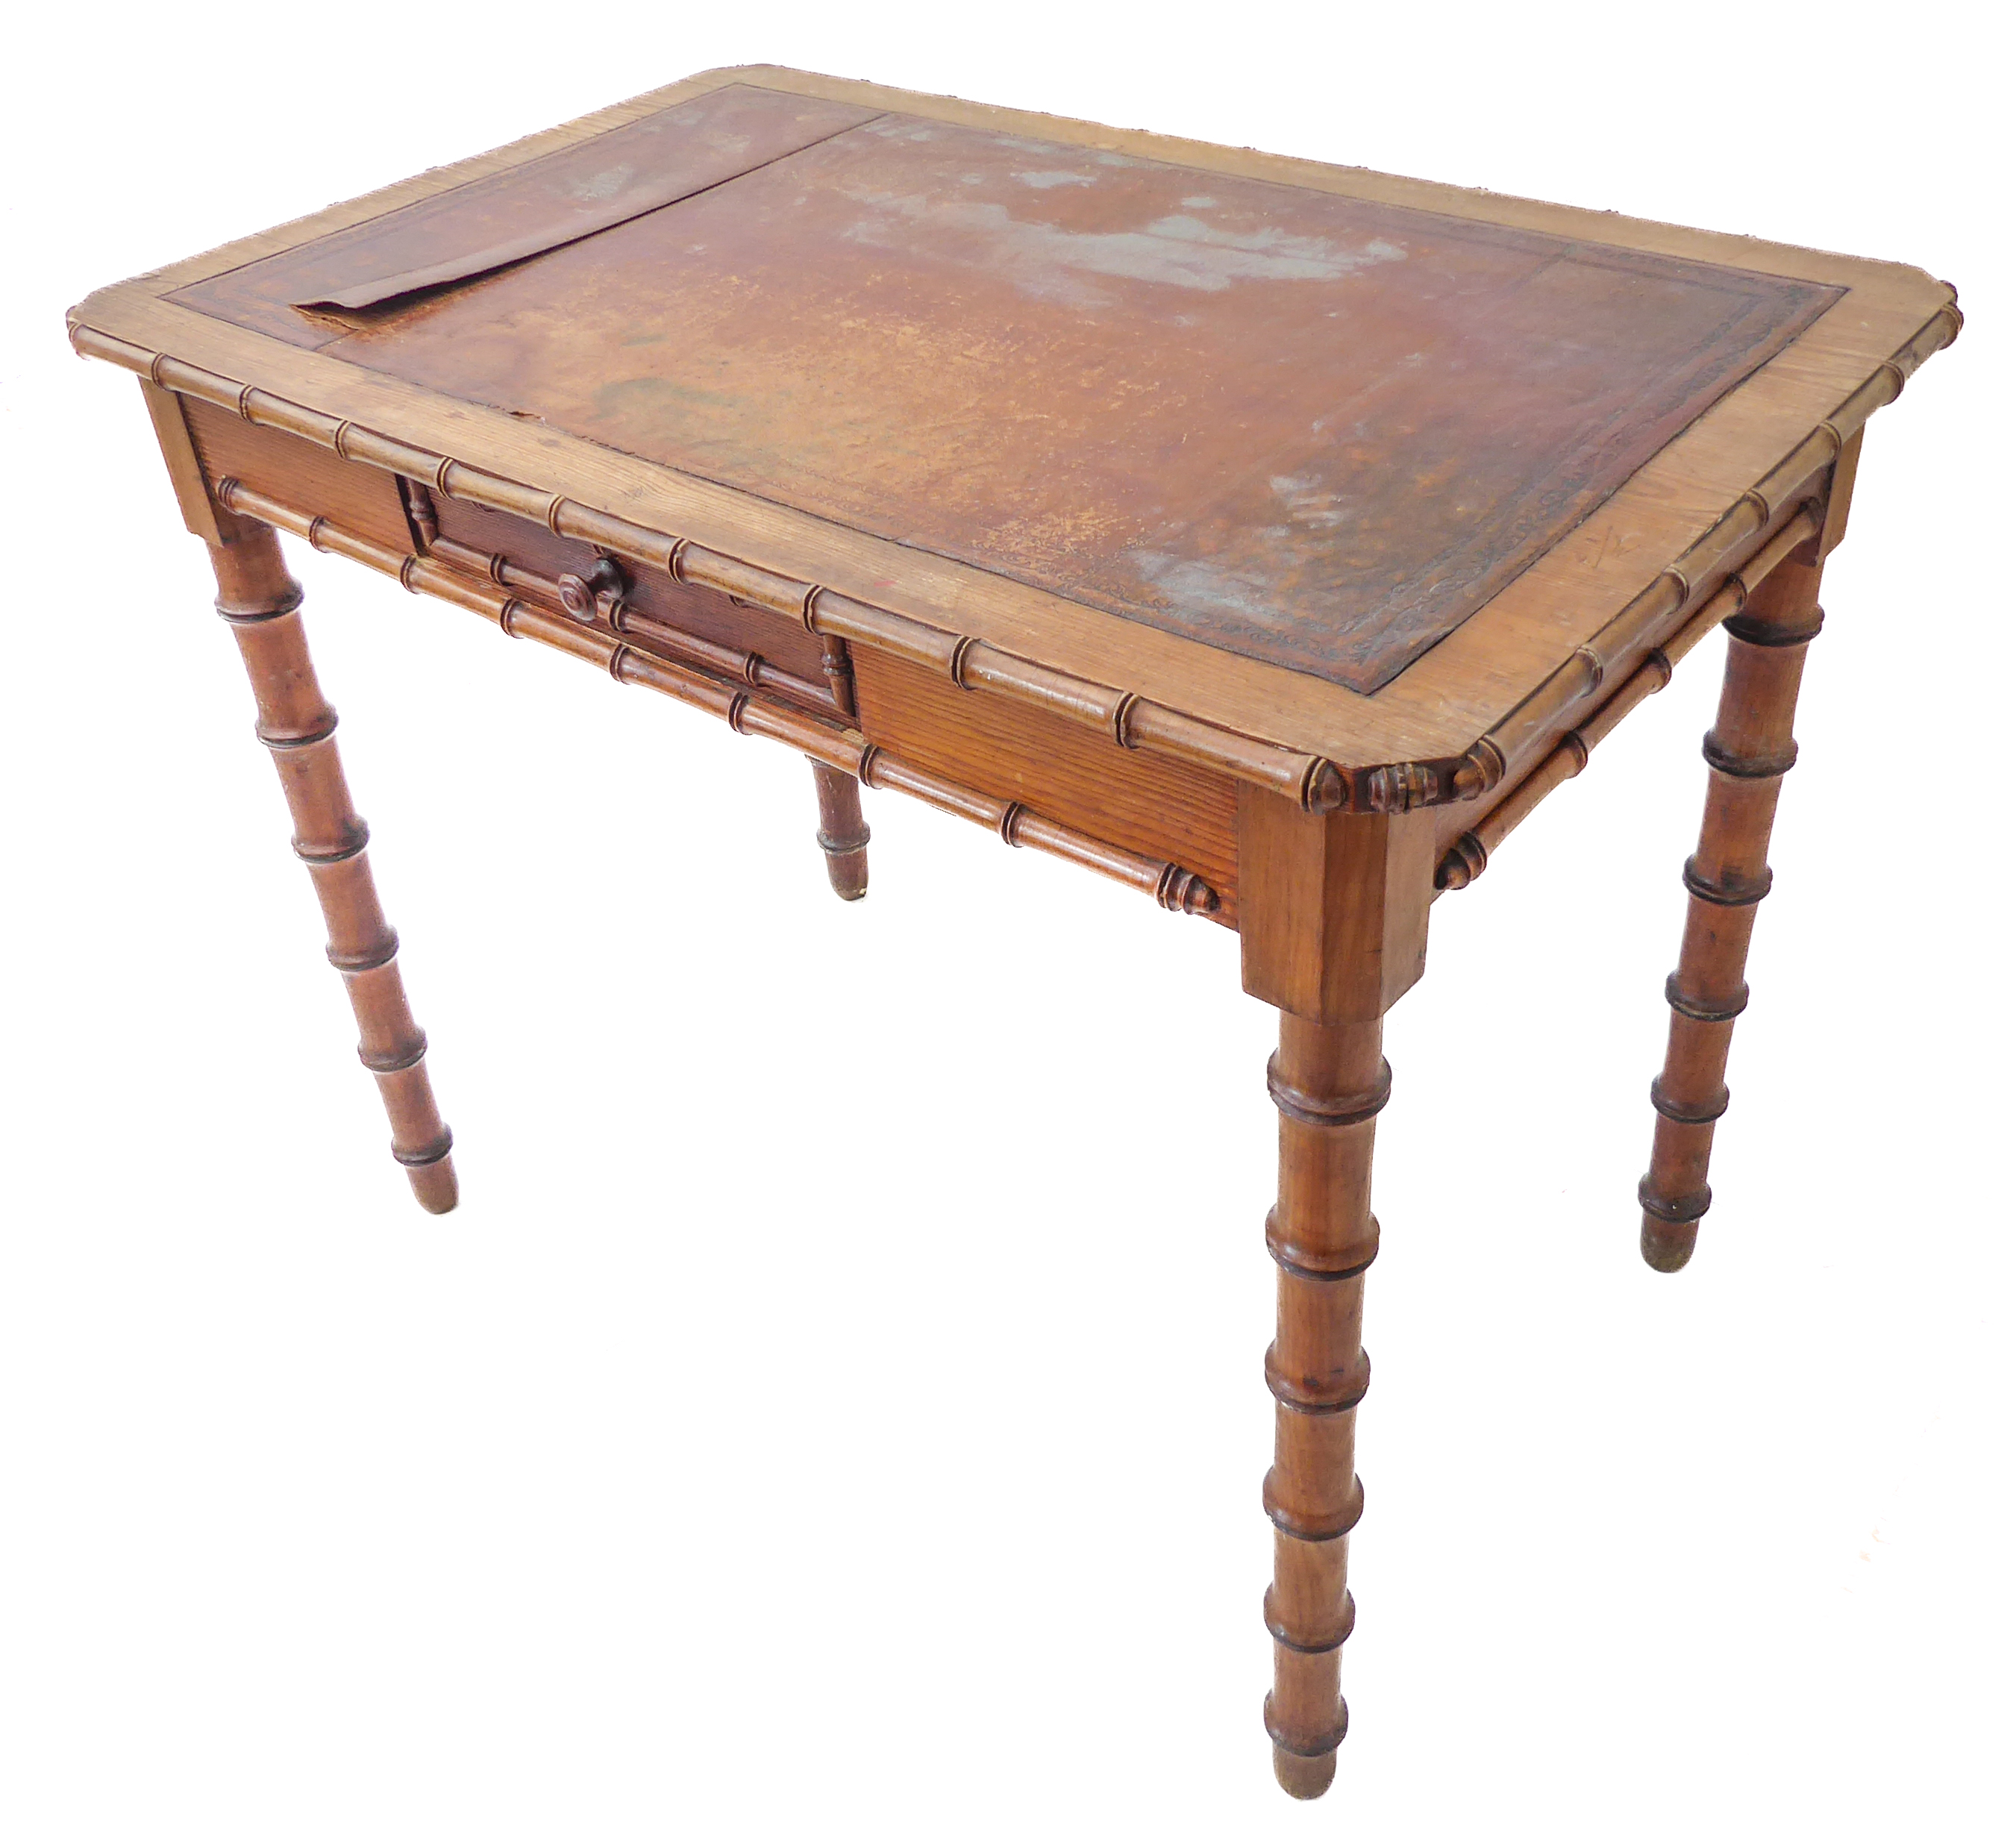 A late 19th century Aesthetic movement Oregon pine writing table: the leather inset top with faux